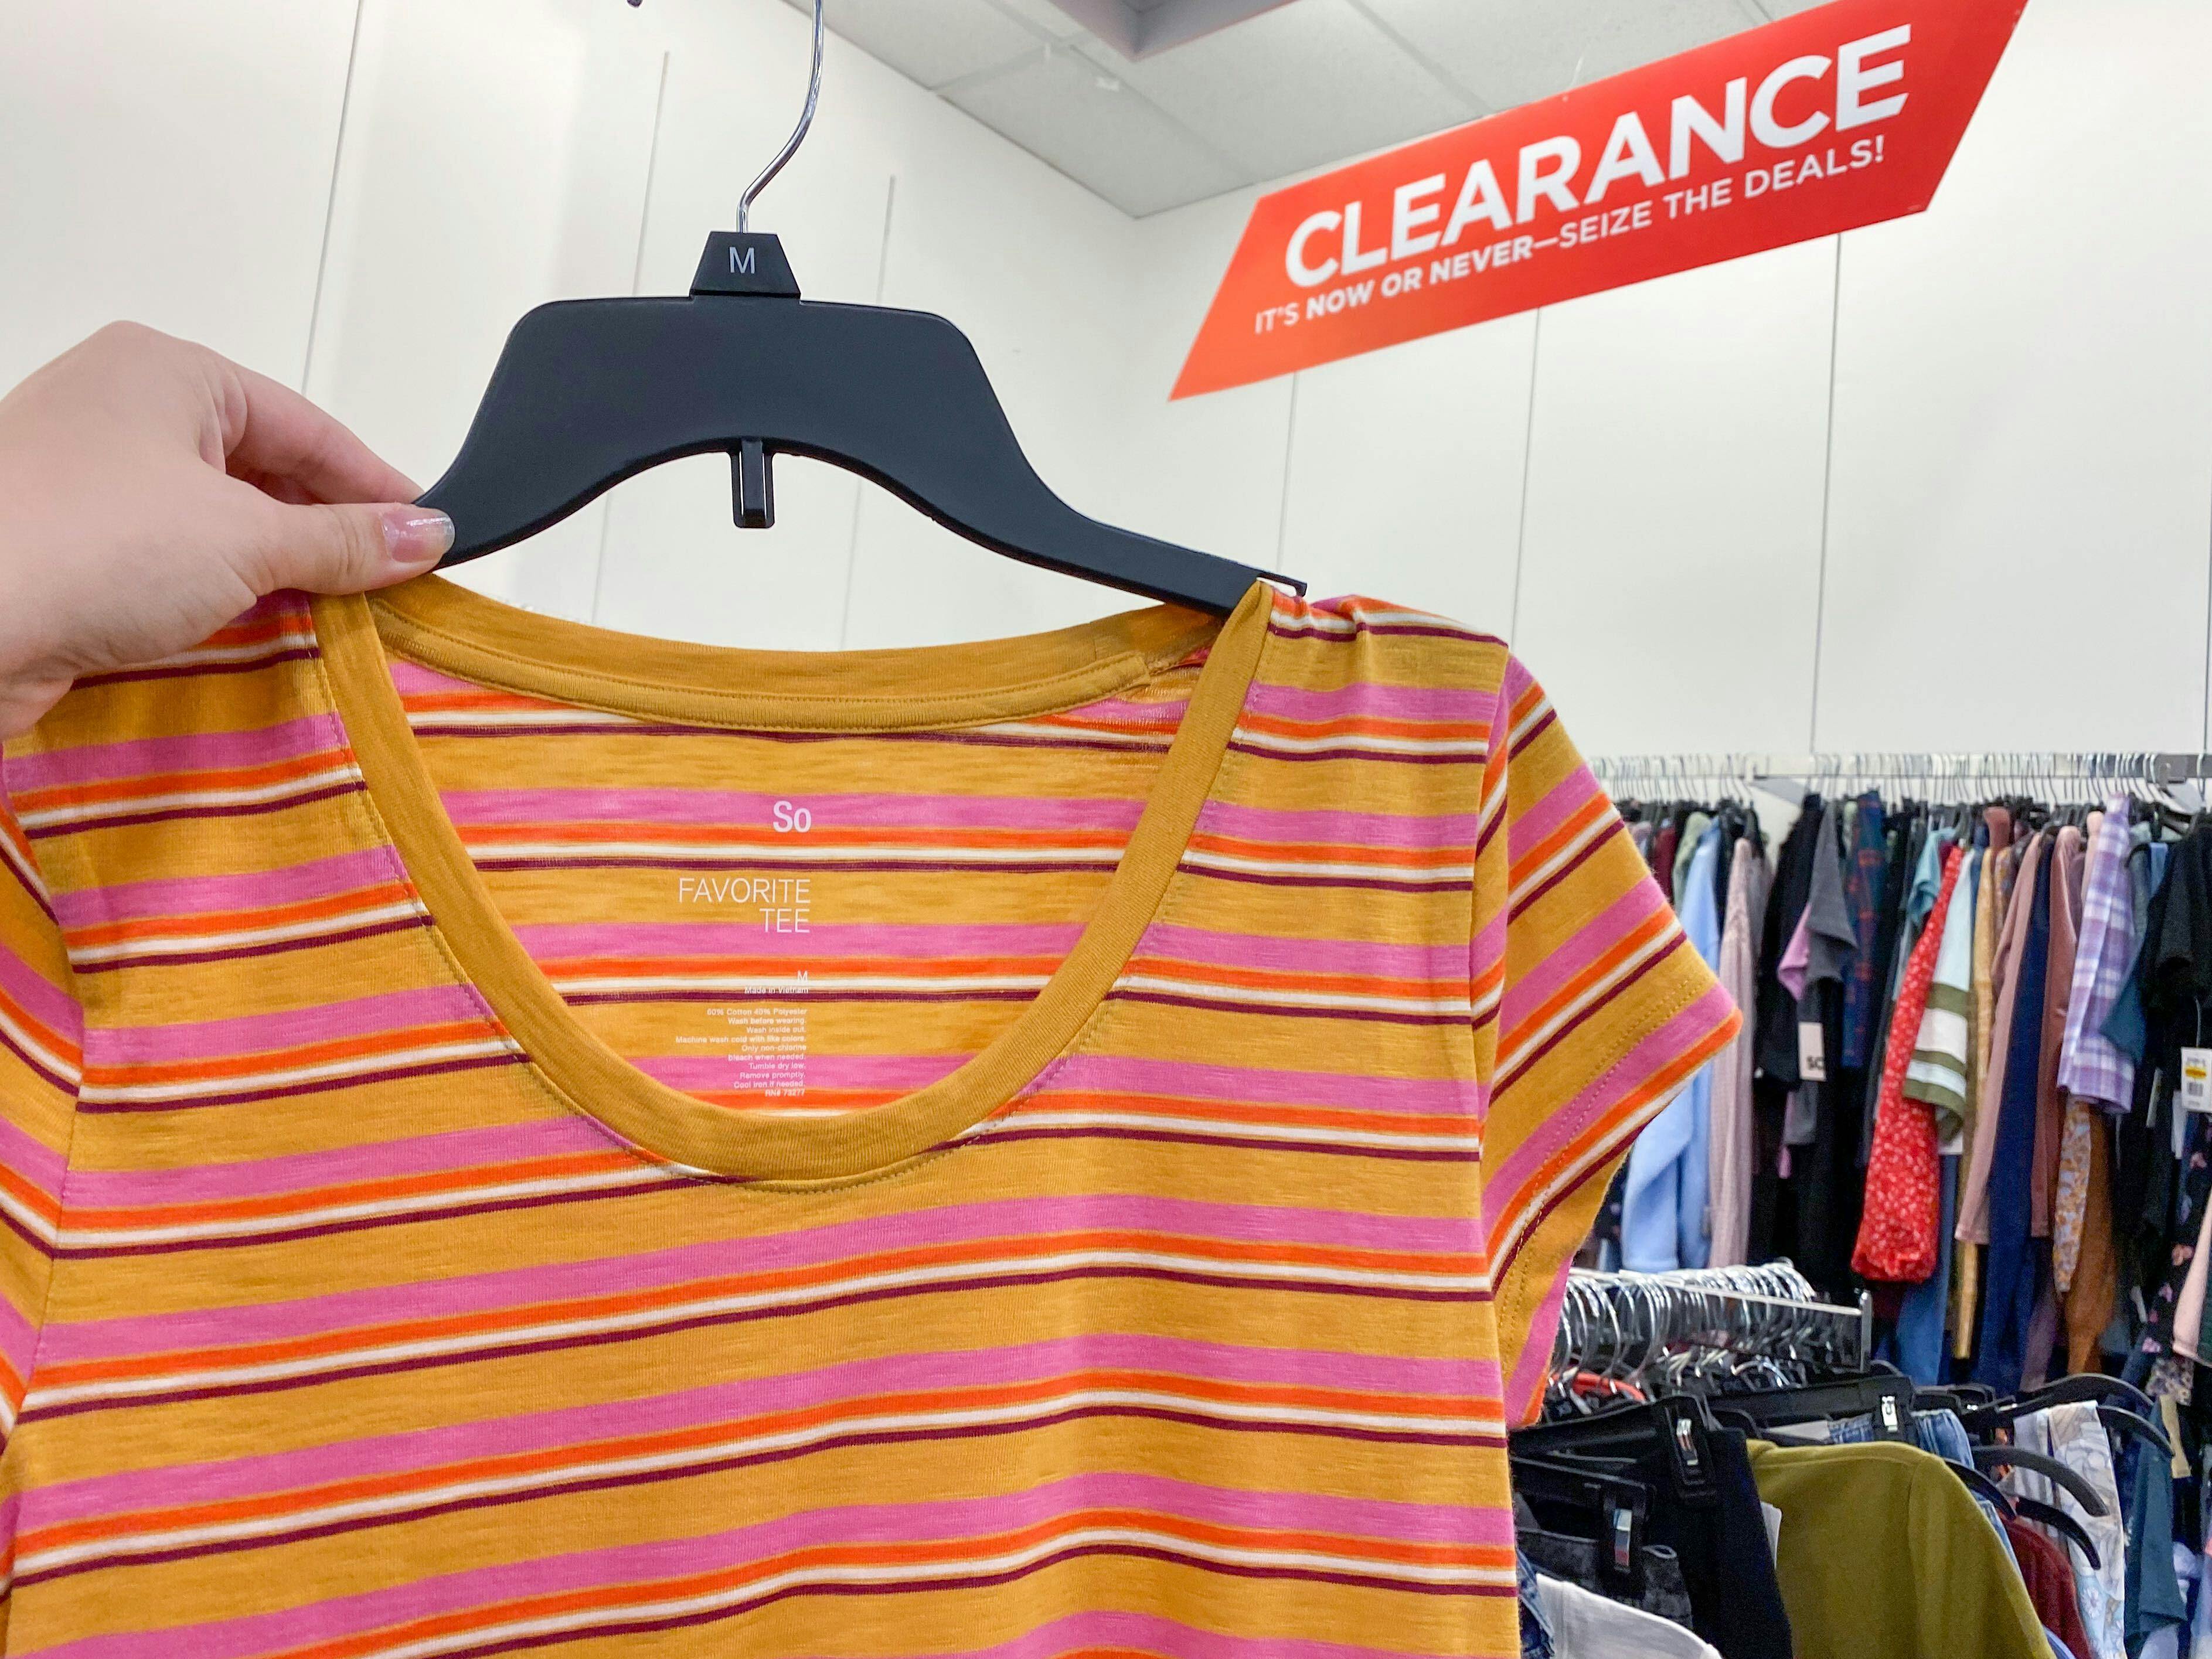 Clearance Handbags, Starting at $8.39 at JCPenney - The Krazy Coupon Lady